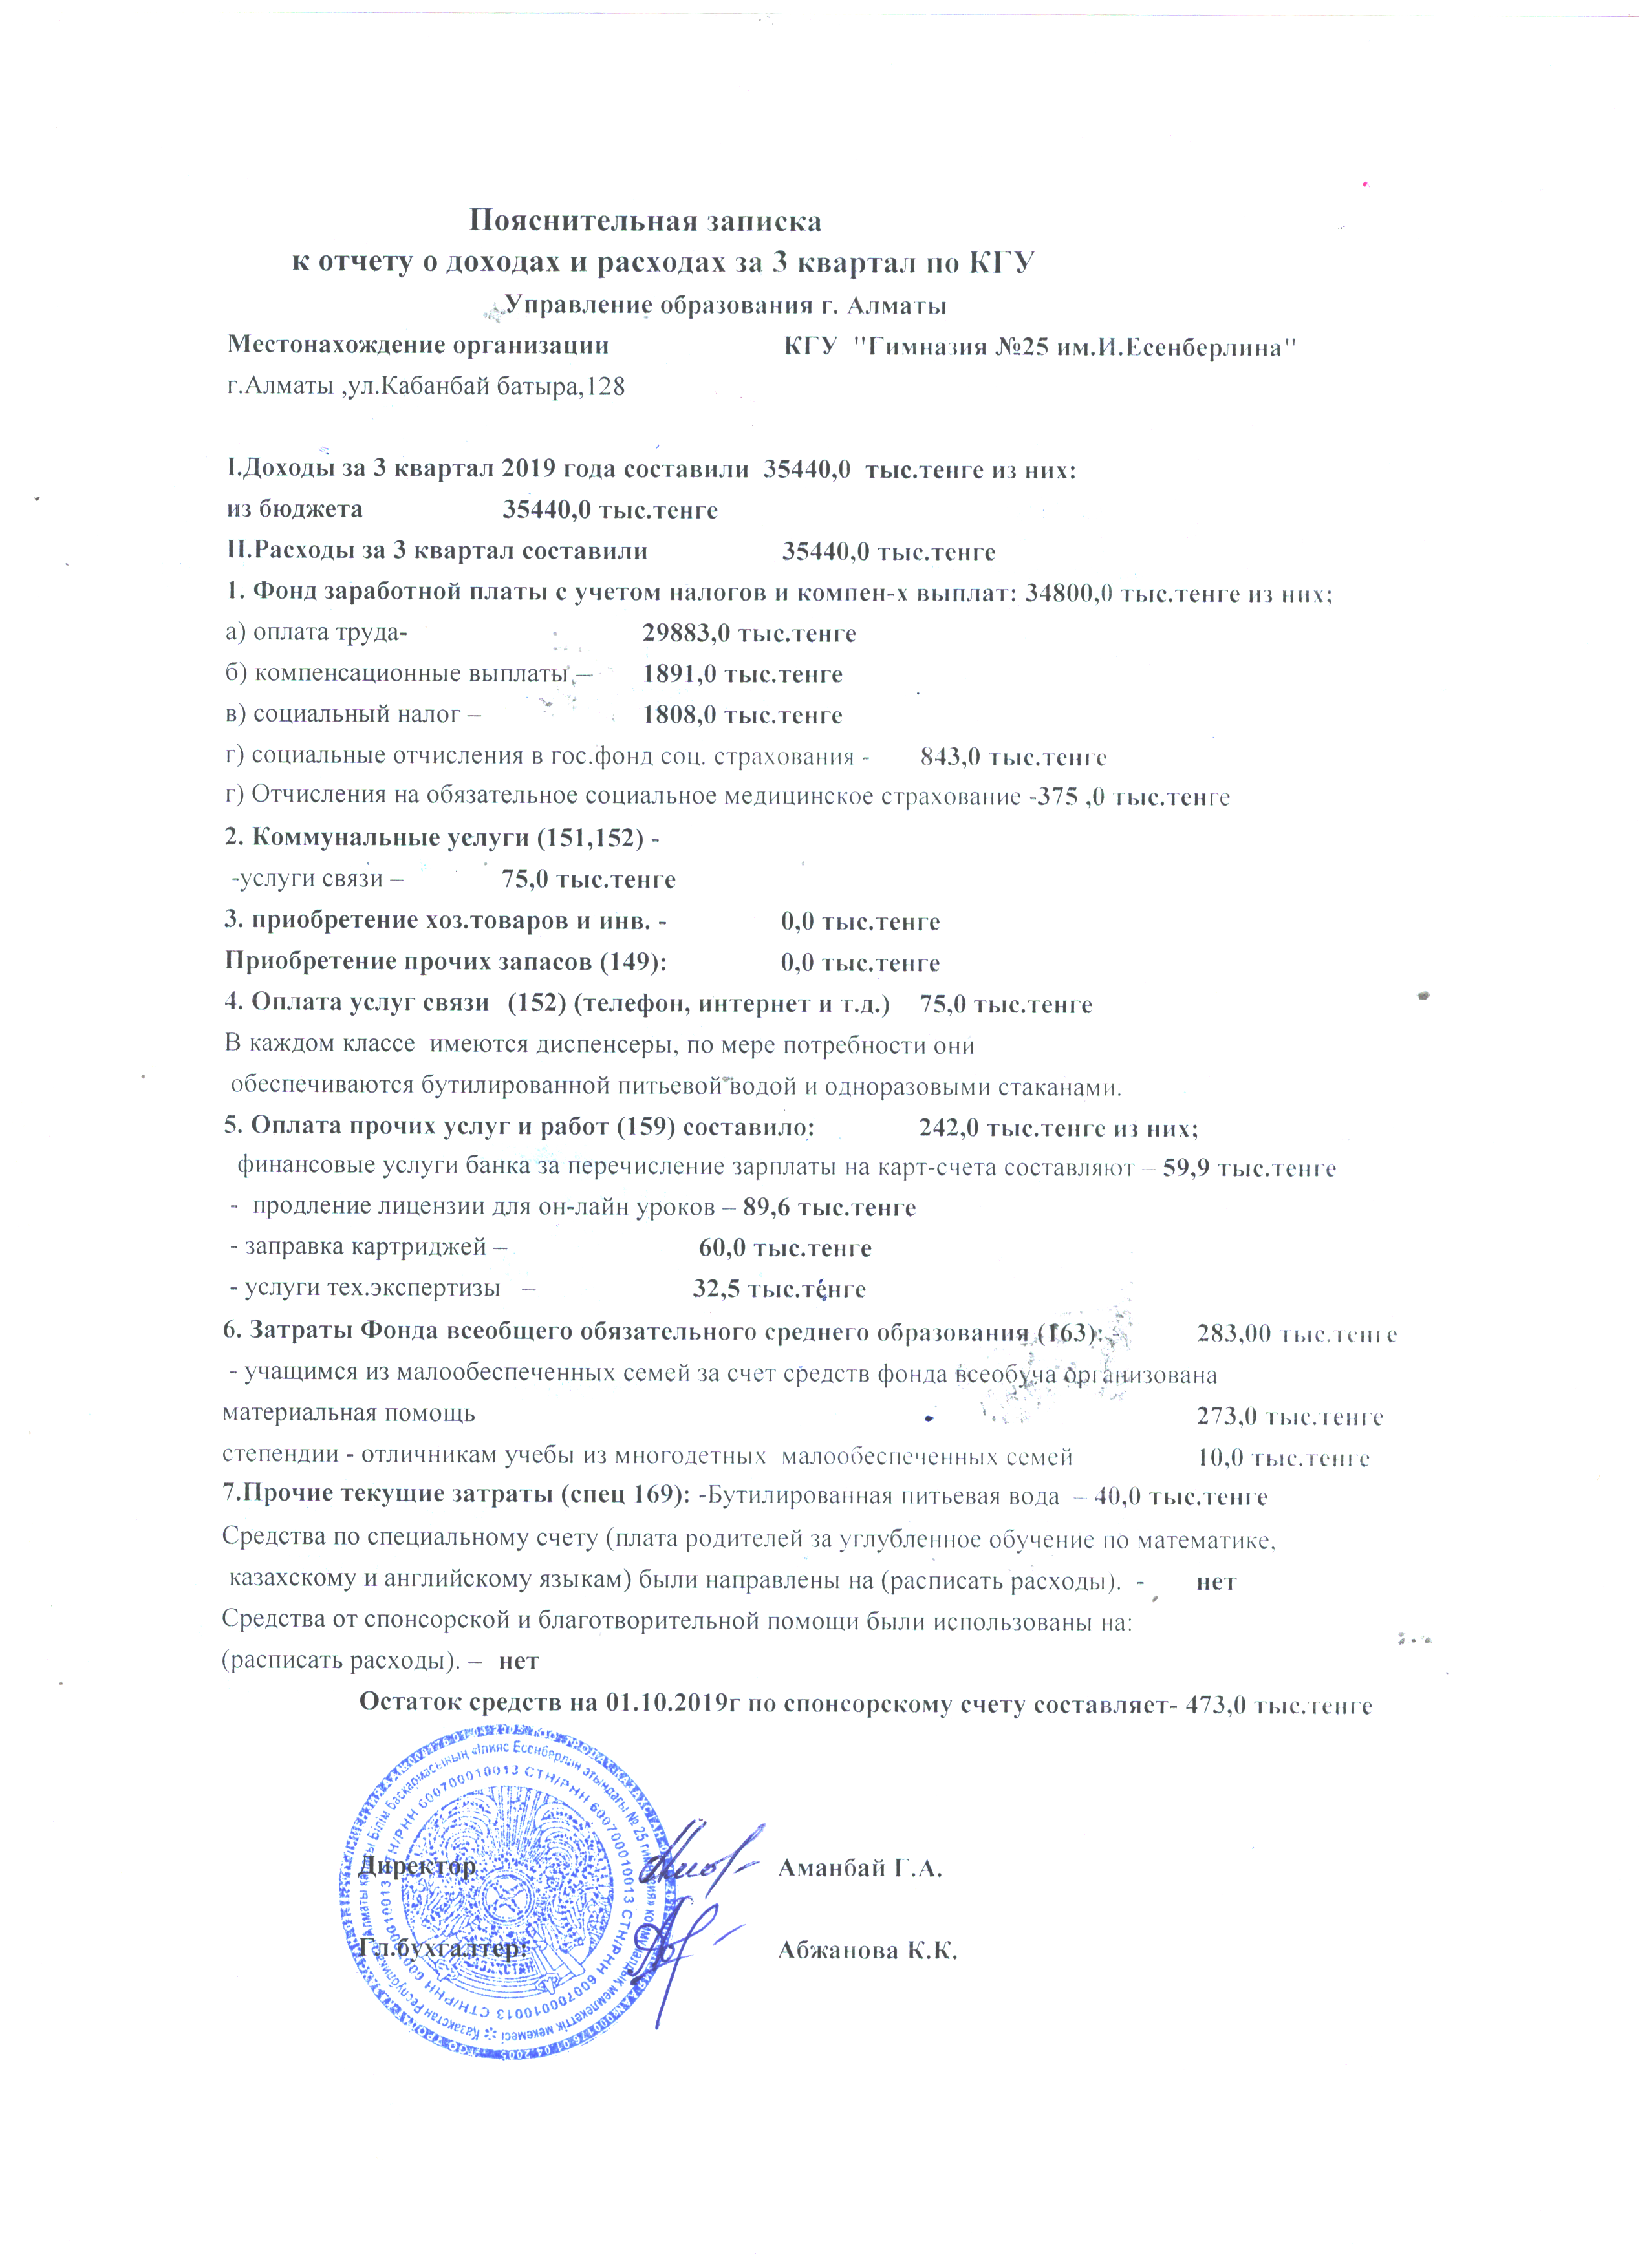 Statement of income and expenses за 3 квартал 2019 года